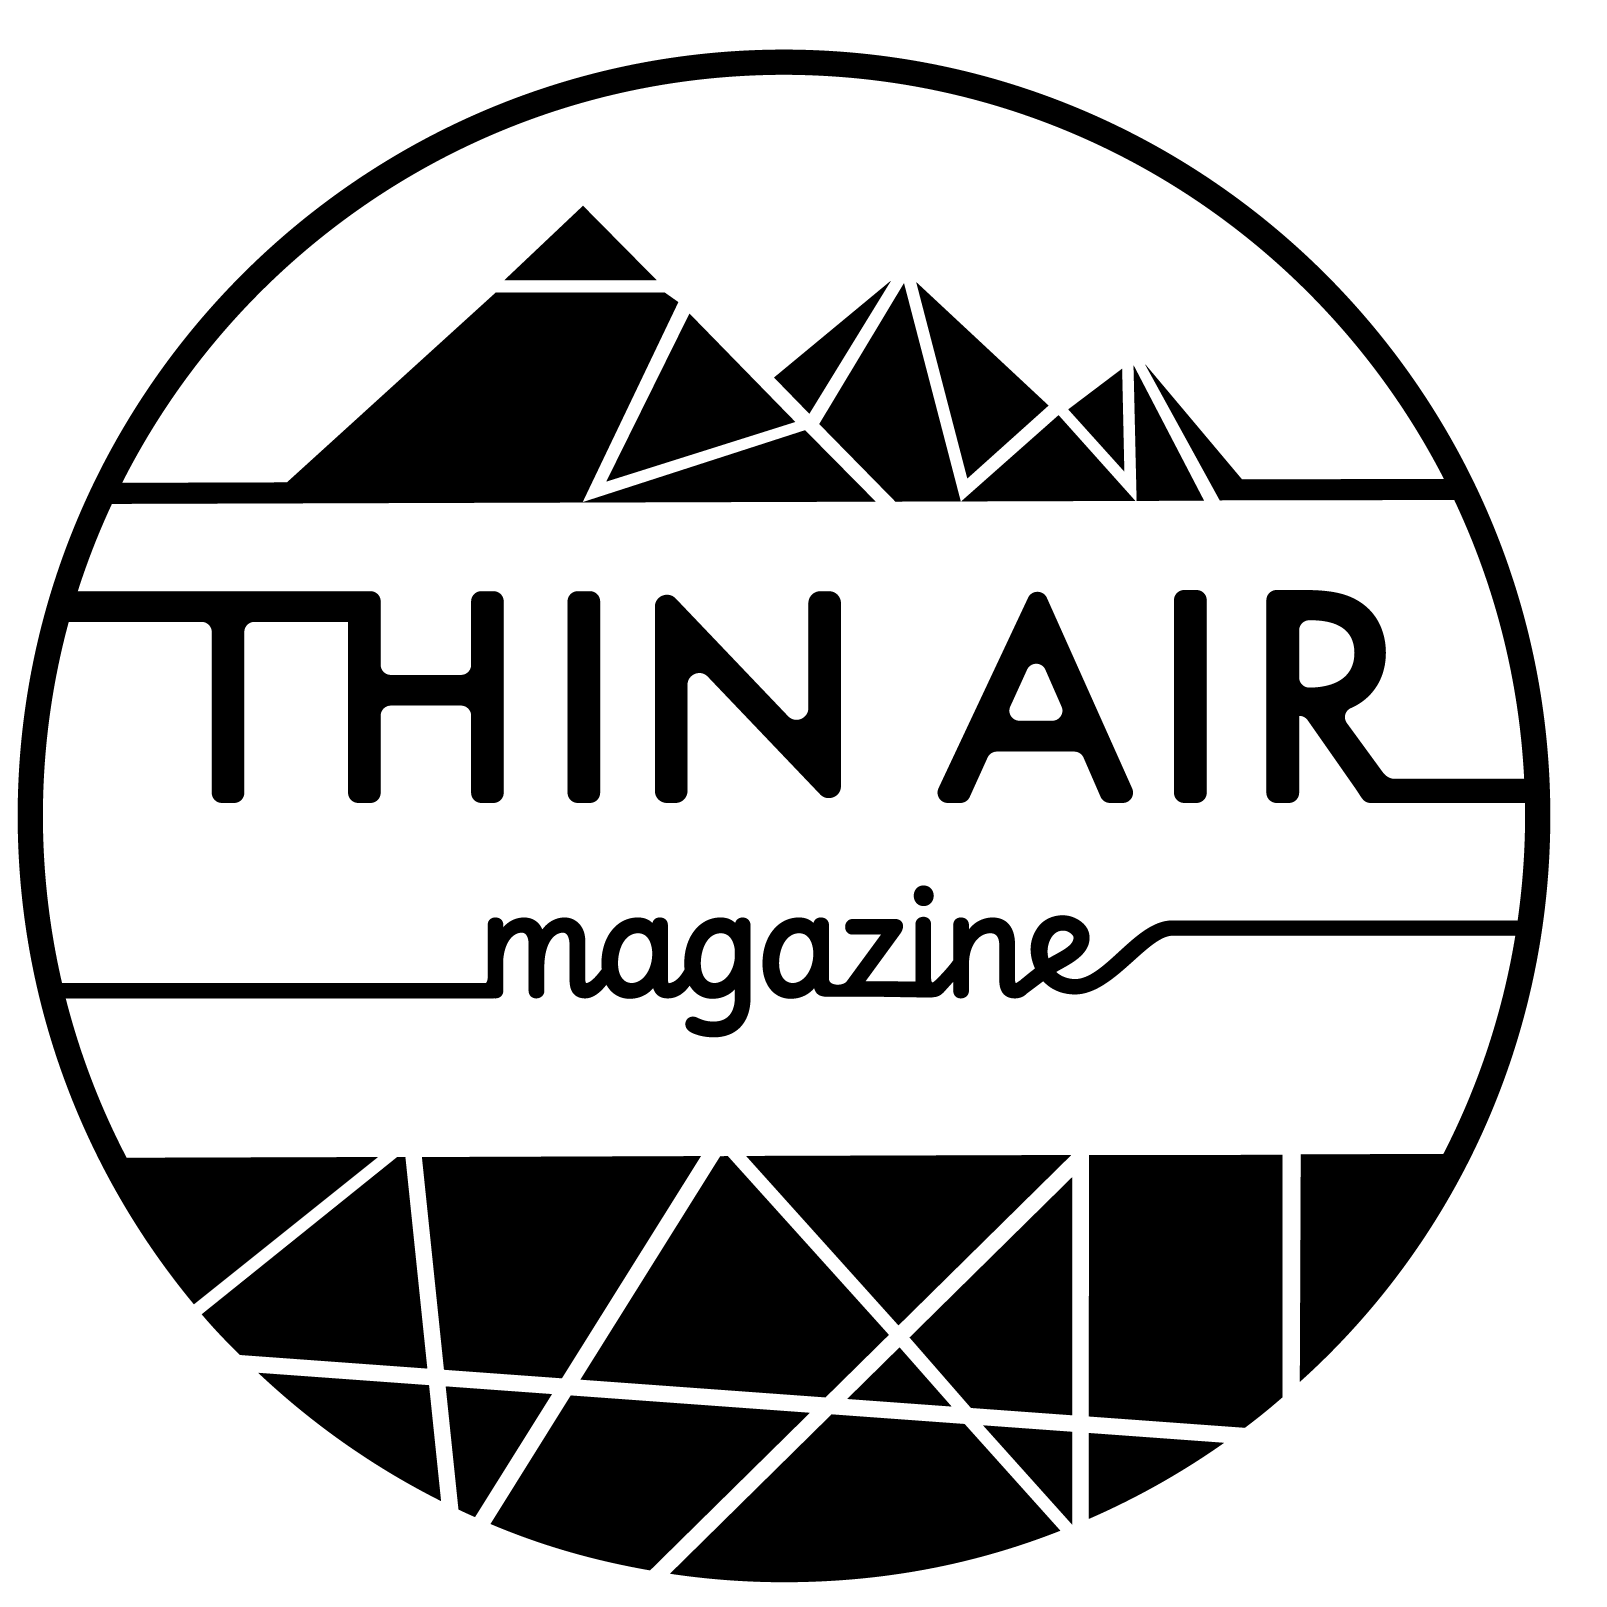 Thin Air Magazine logo, with a mountain range about the text, all inscribed in a circle